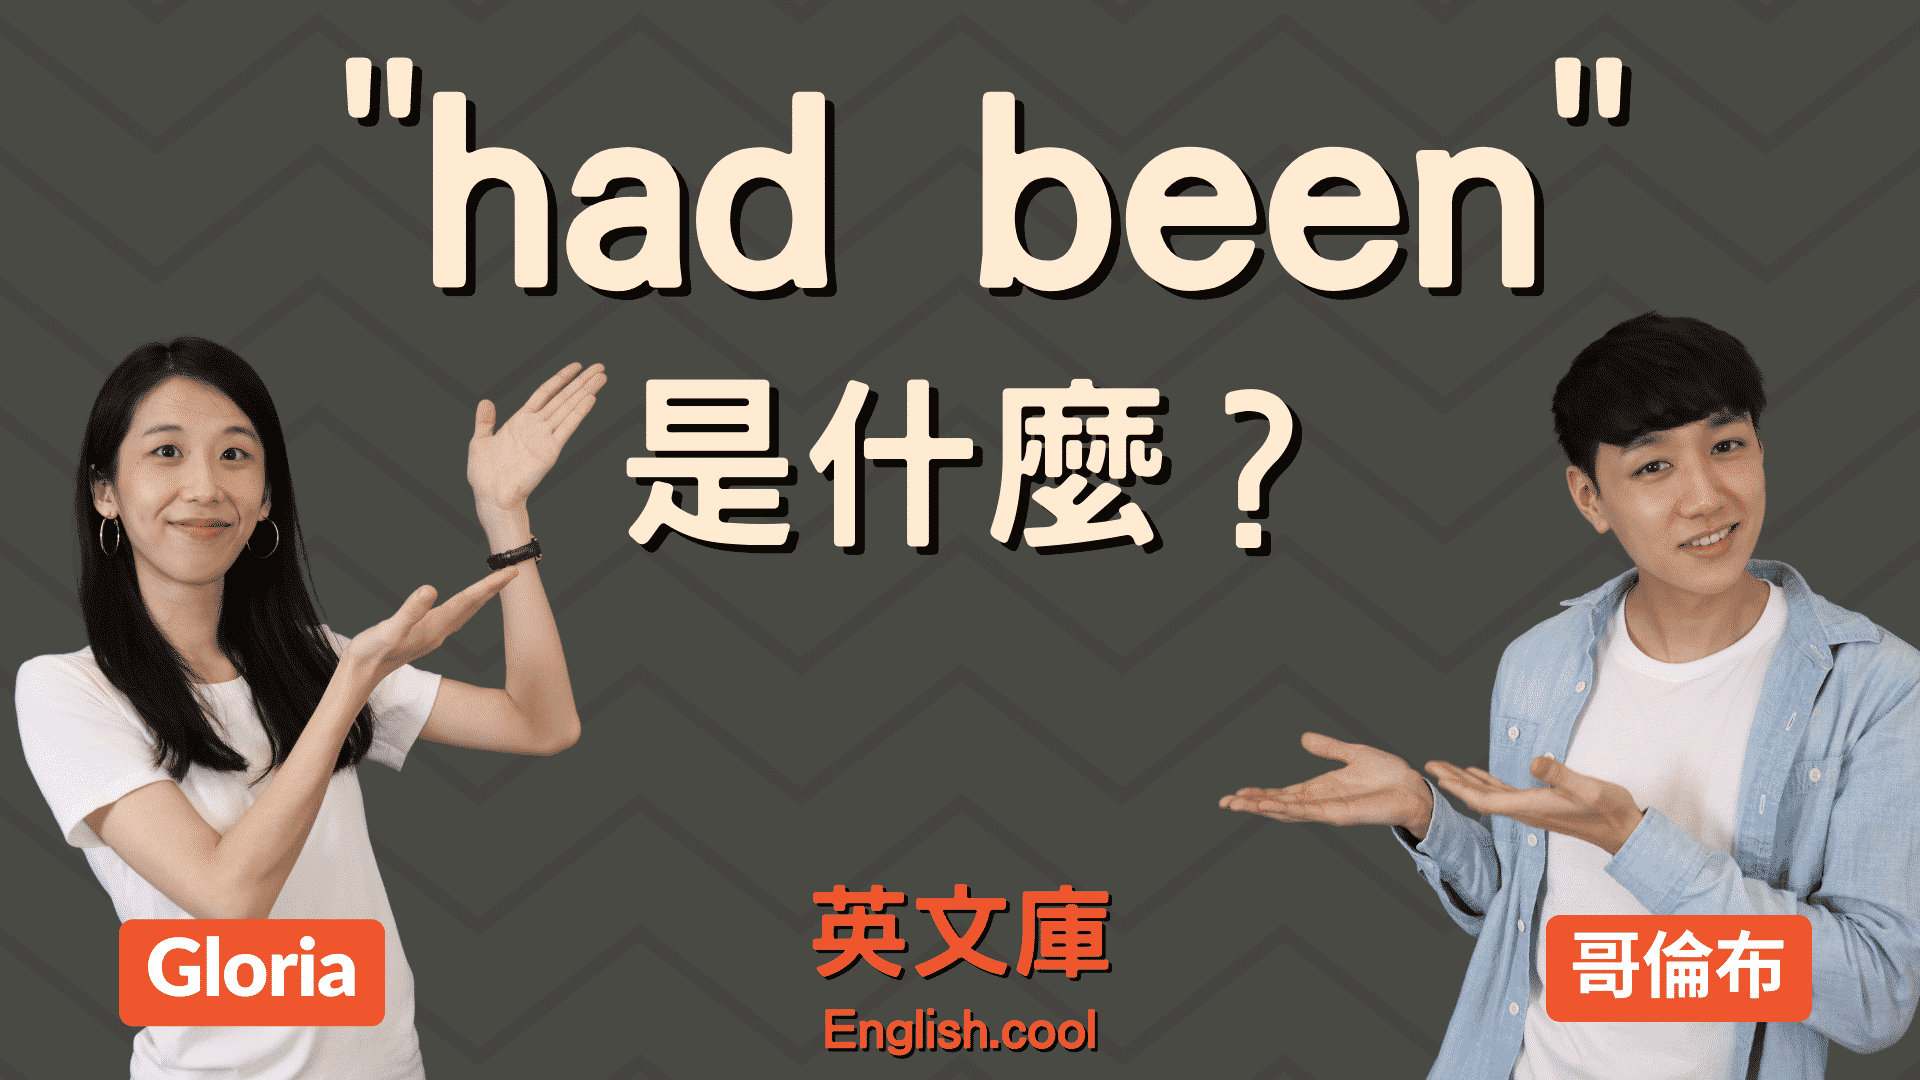 You are currently viewing “had been” 是什麼意思？怎麼用？ (含例句）